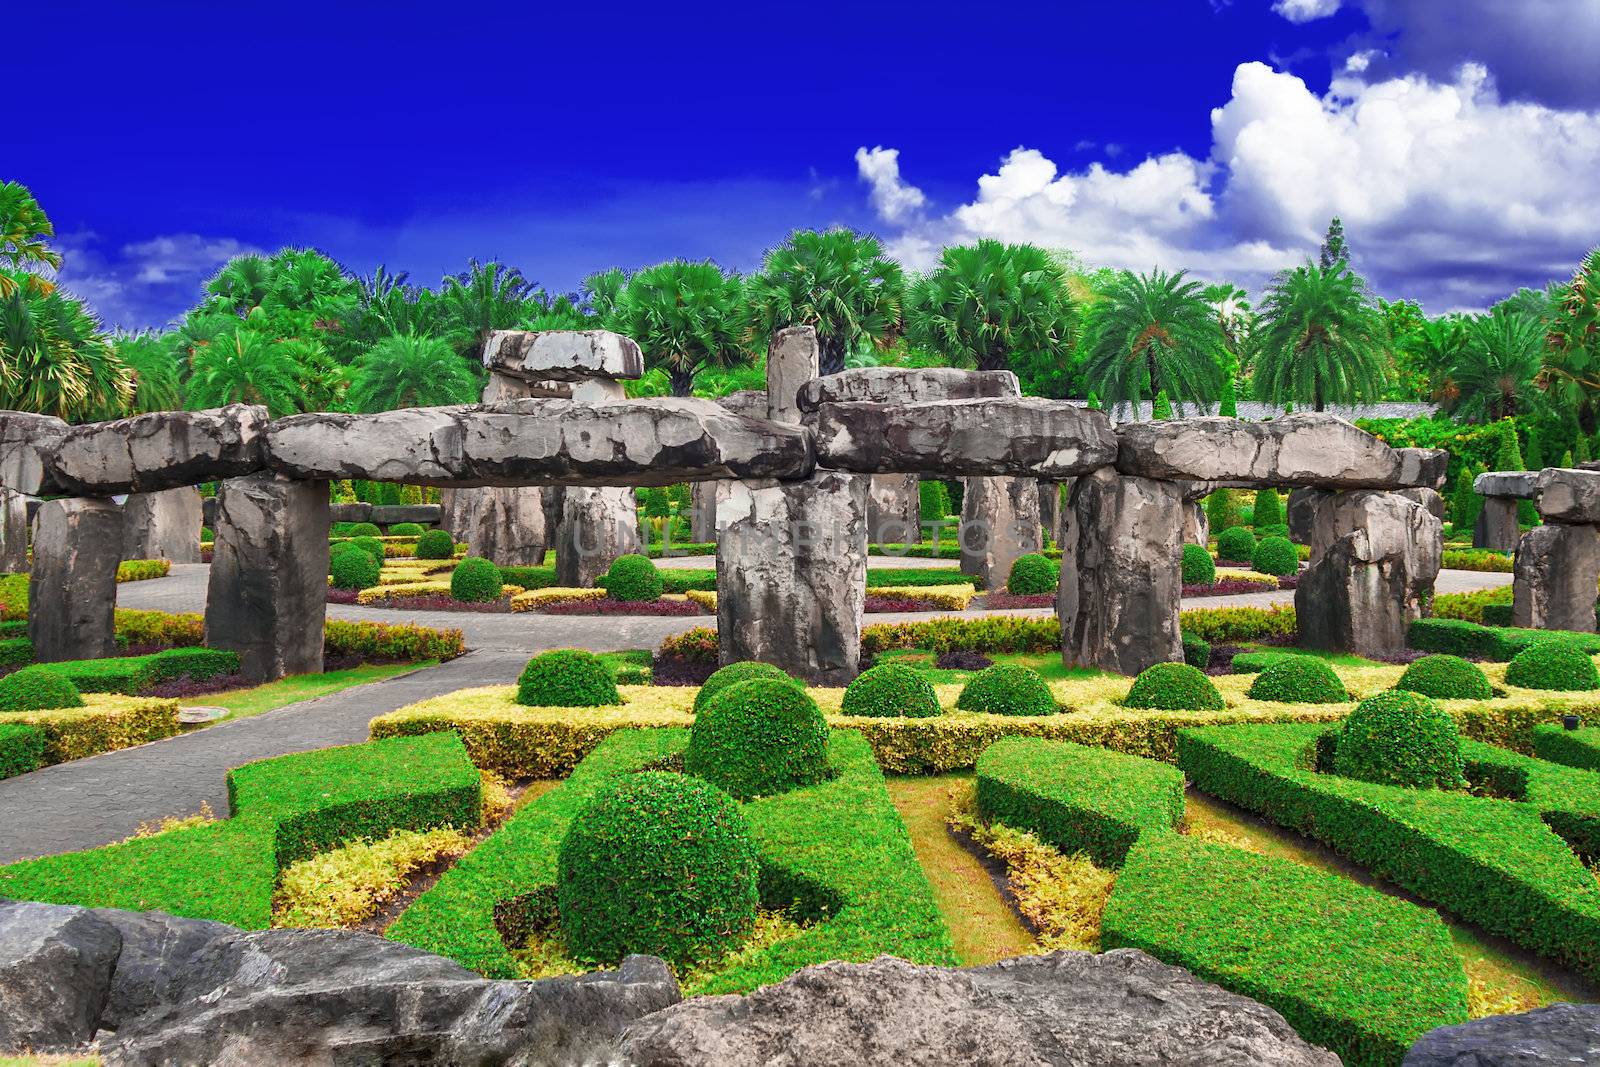 The composition of the stones. Nong Nooch. Thailand. Summer 2013.